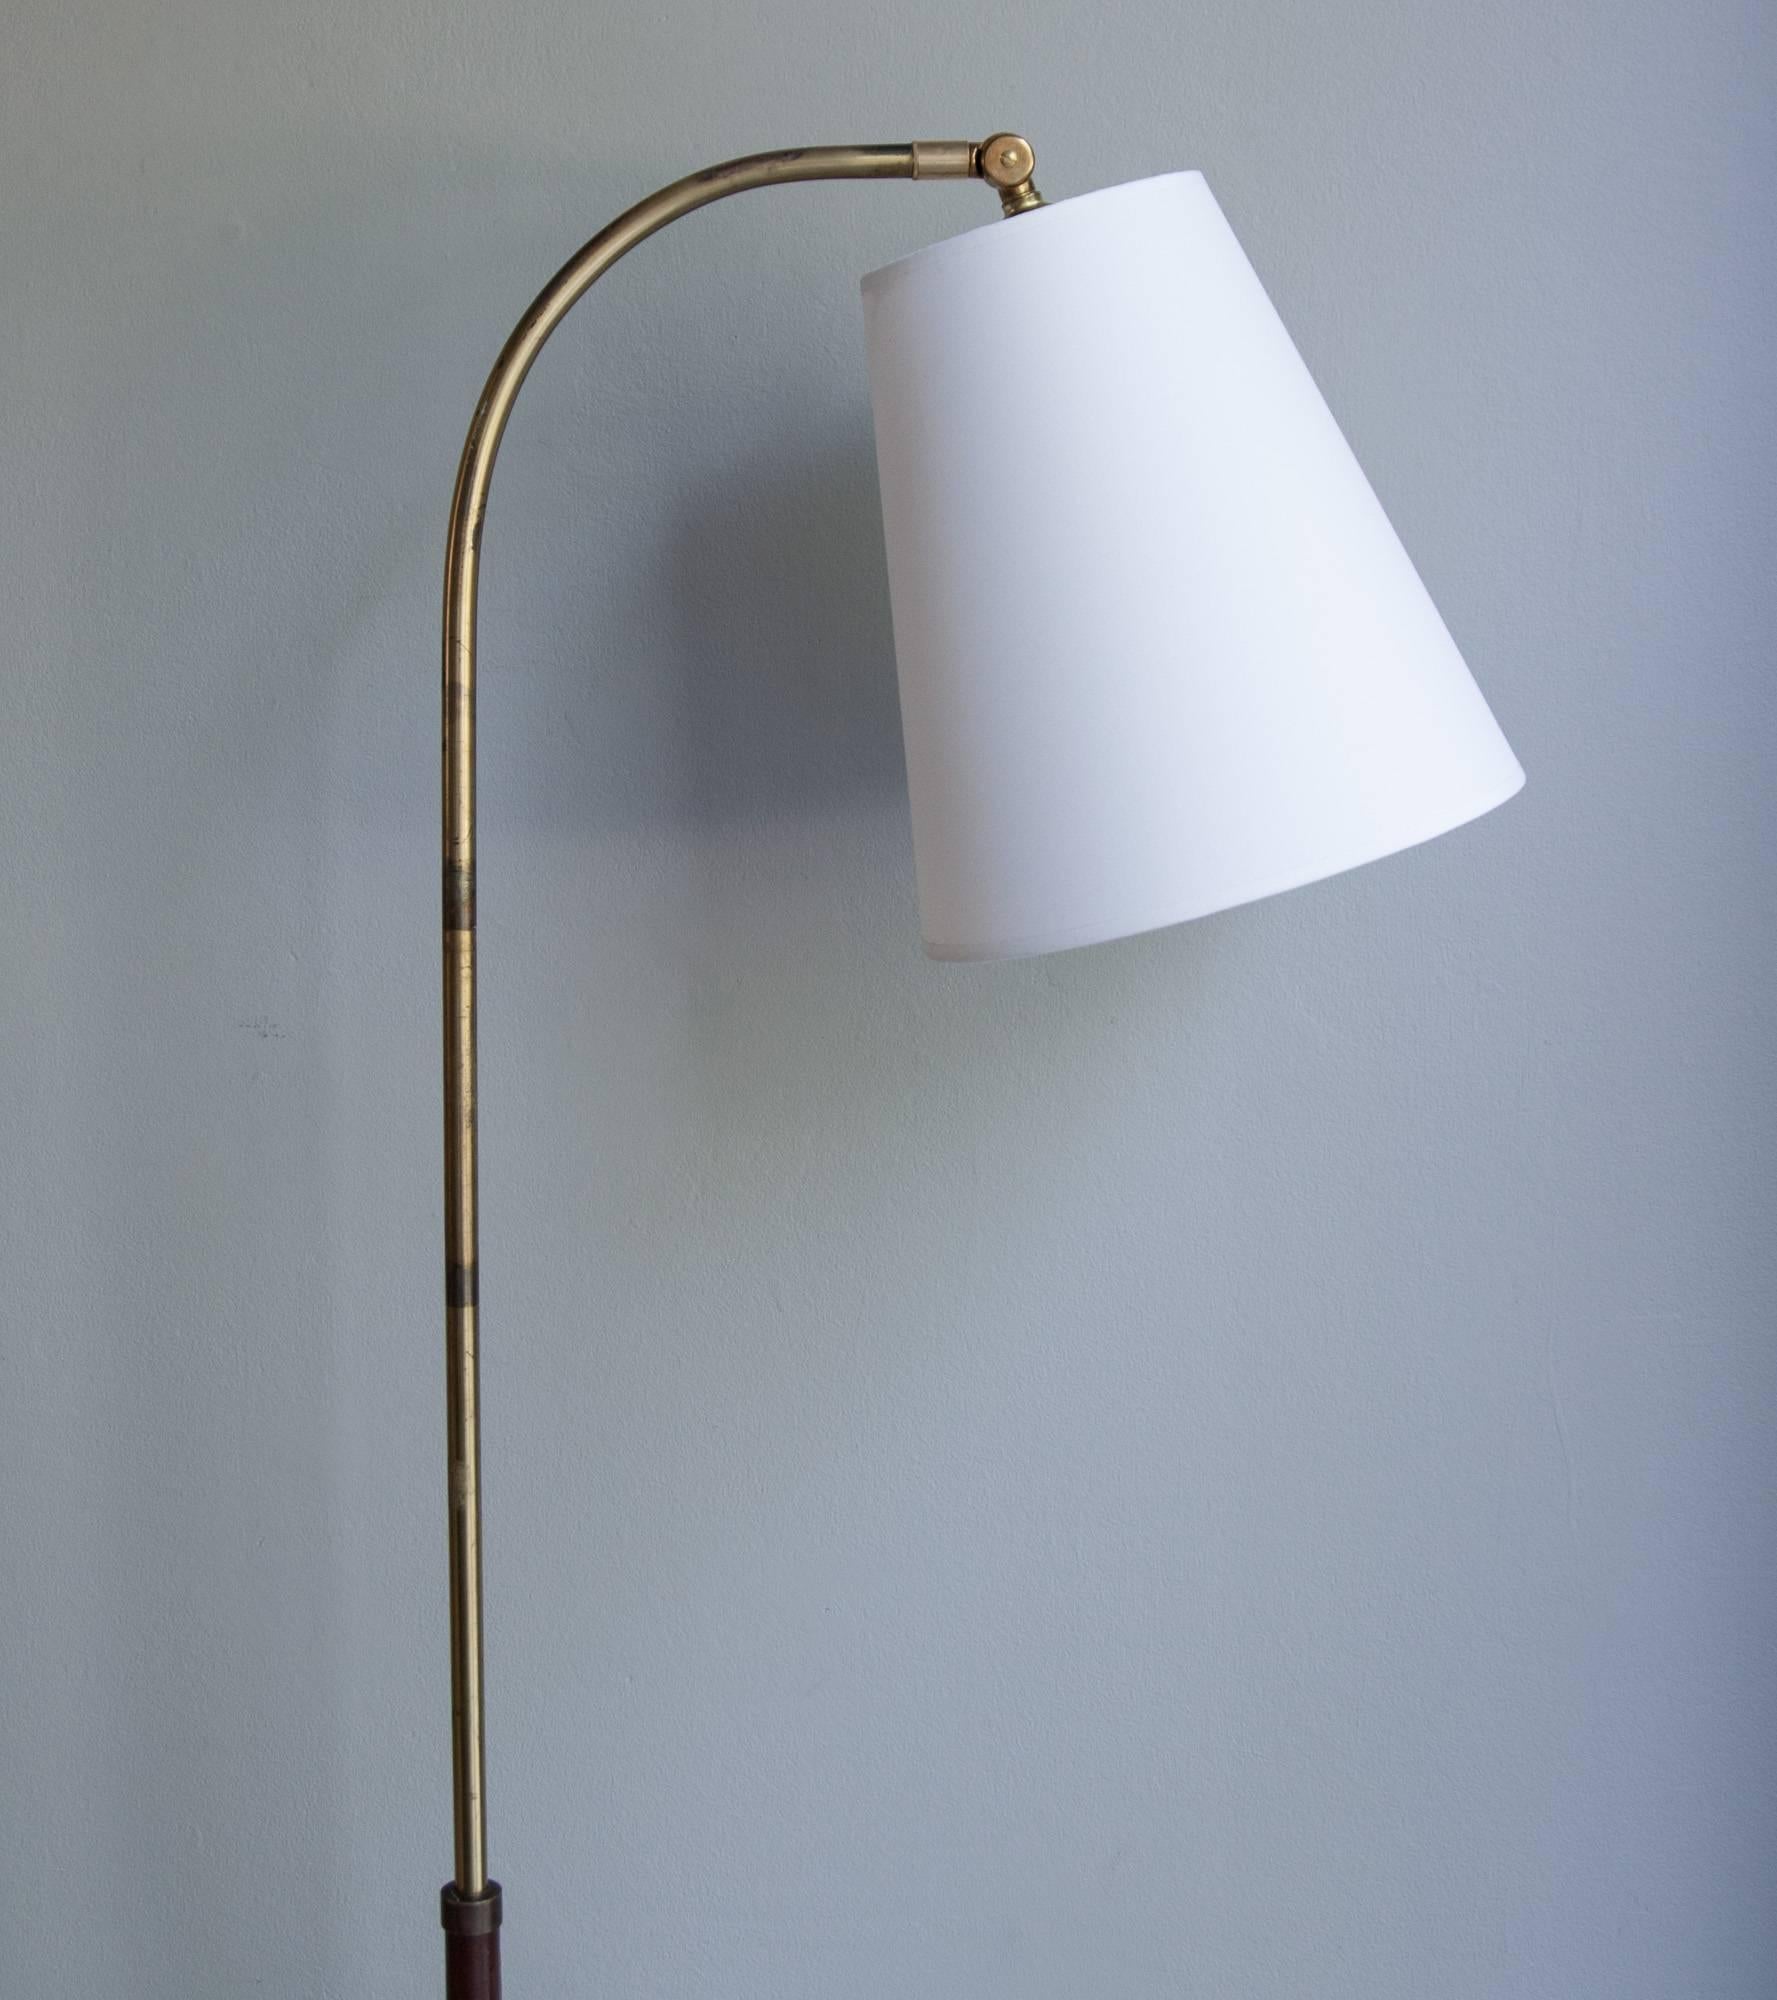 Vintage leather and brass floor light, Denmark, 1940s.
With a circular base in polished brass, the lamp has the stem covered in hand-sewn brown leather with white seams.
Adjustable in height from 140 to 180cm, the lamp has a newly made shade in